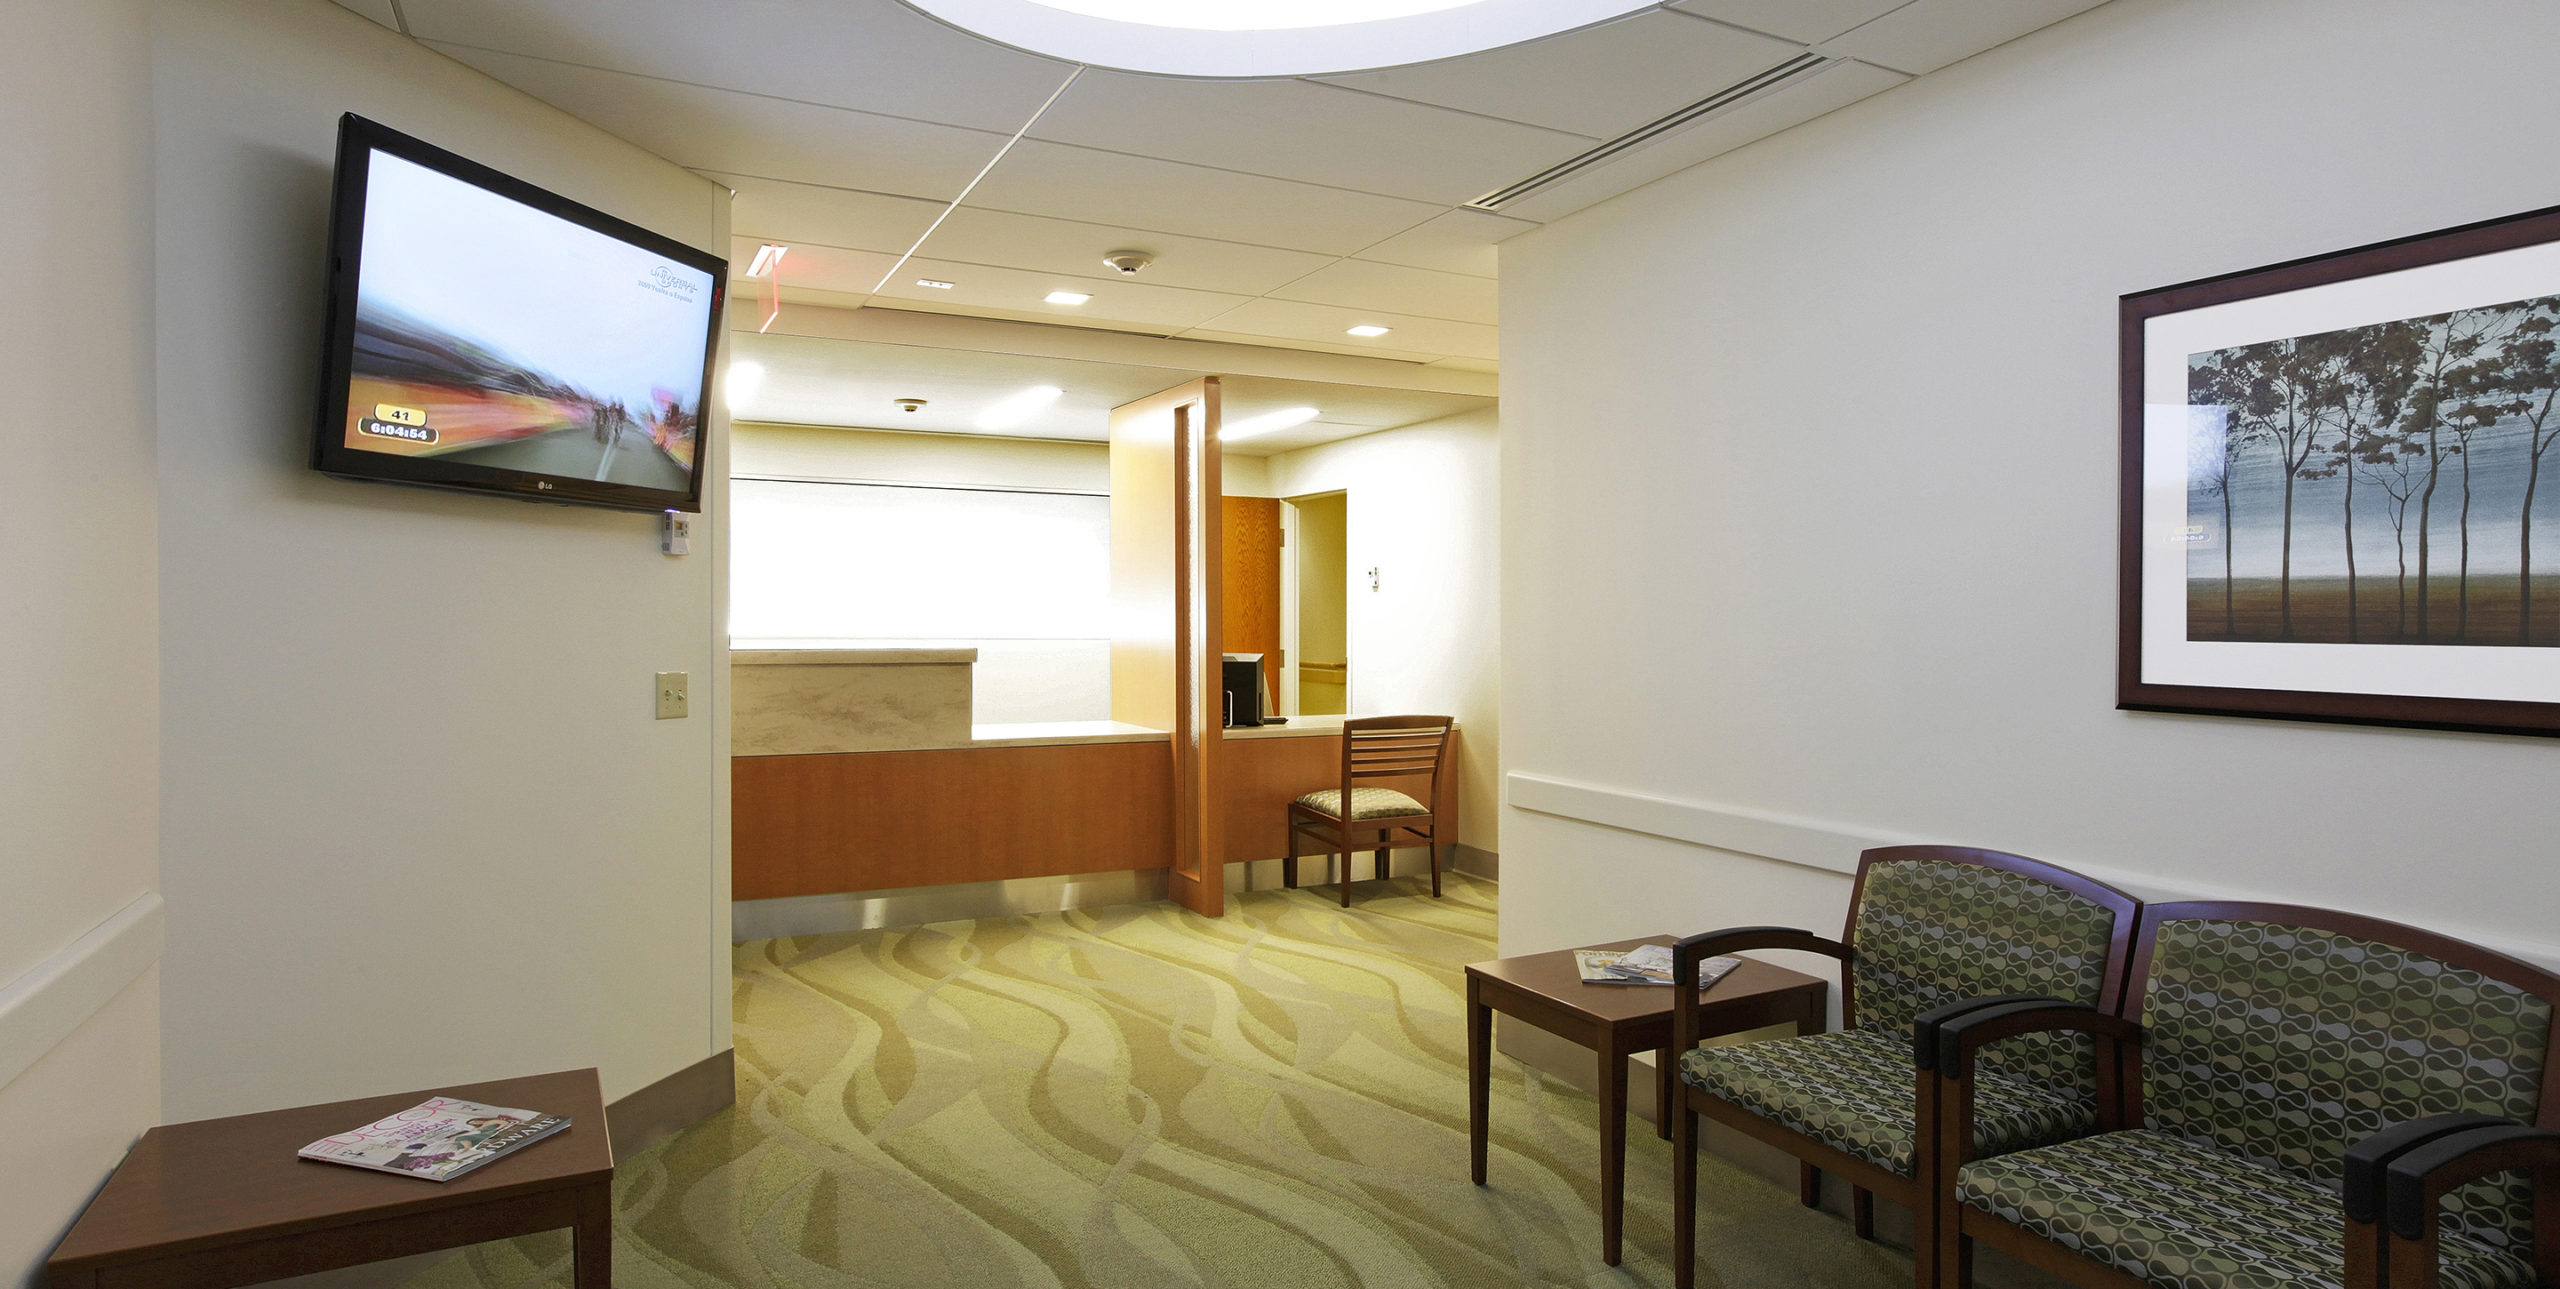 Lobby of patient infusion room at John T Mathew Memorial Hospital